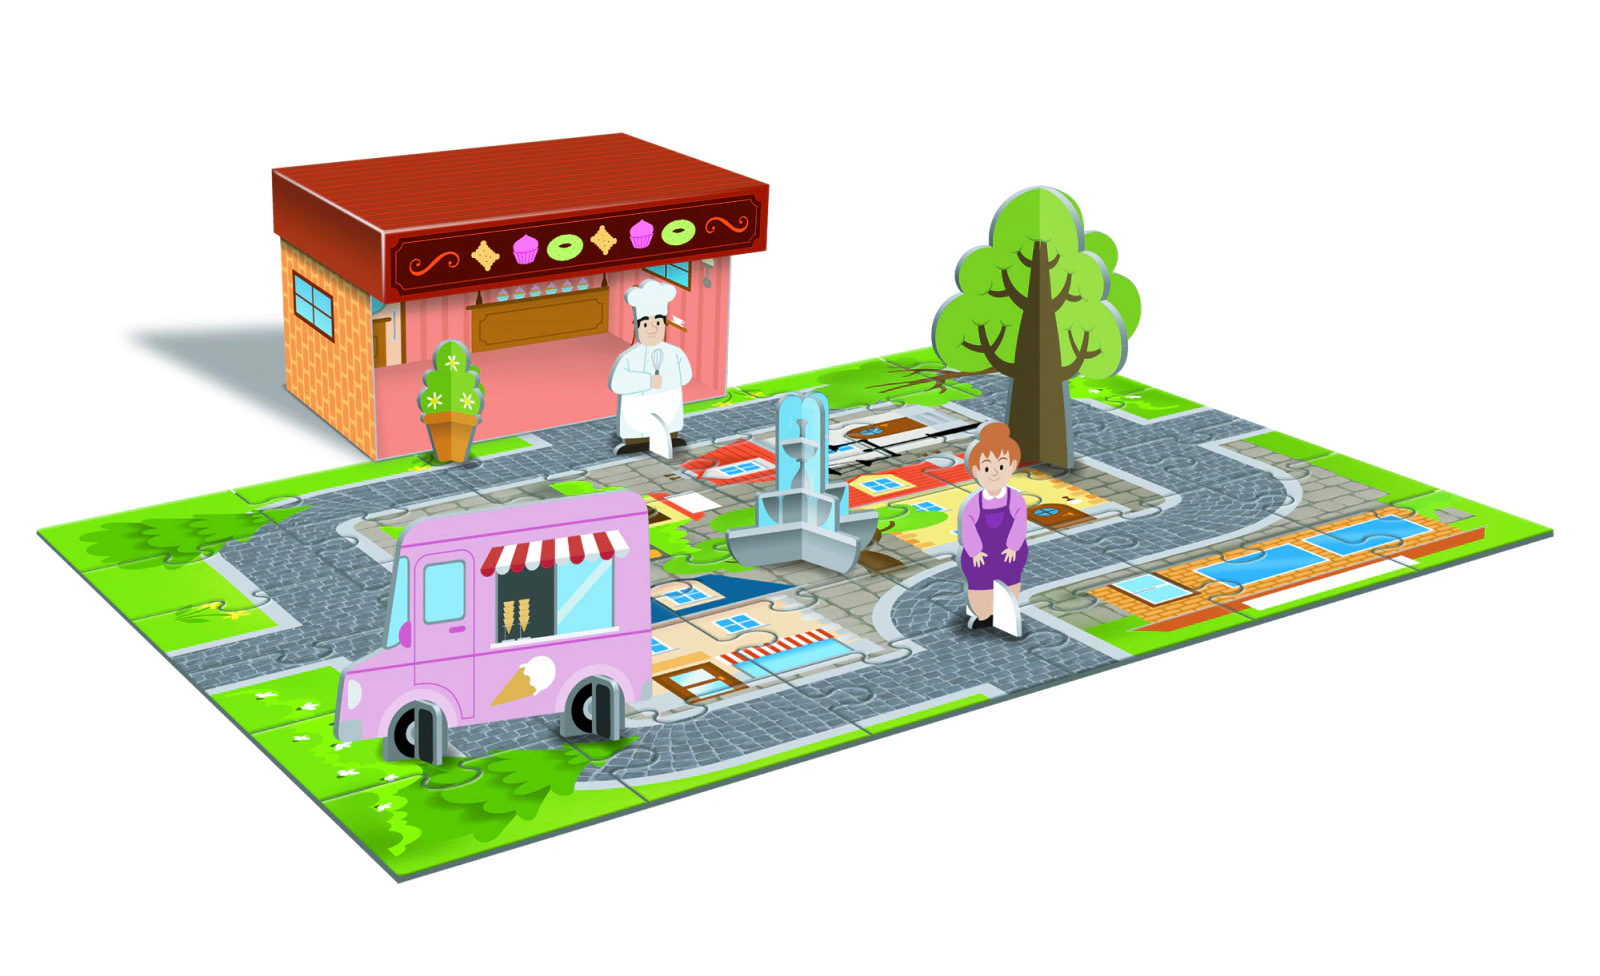 Puzzle 36 piese - My Town Playset - Bakery | Ludattica